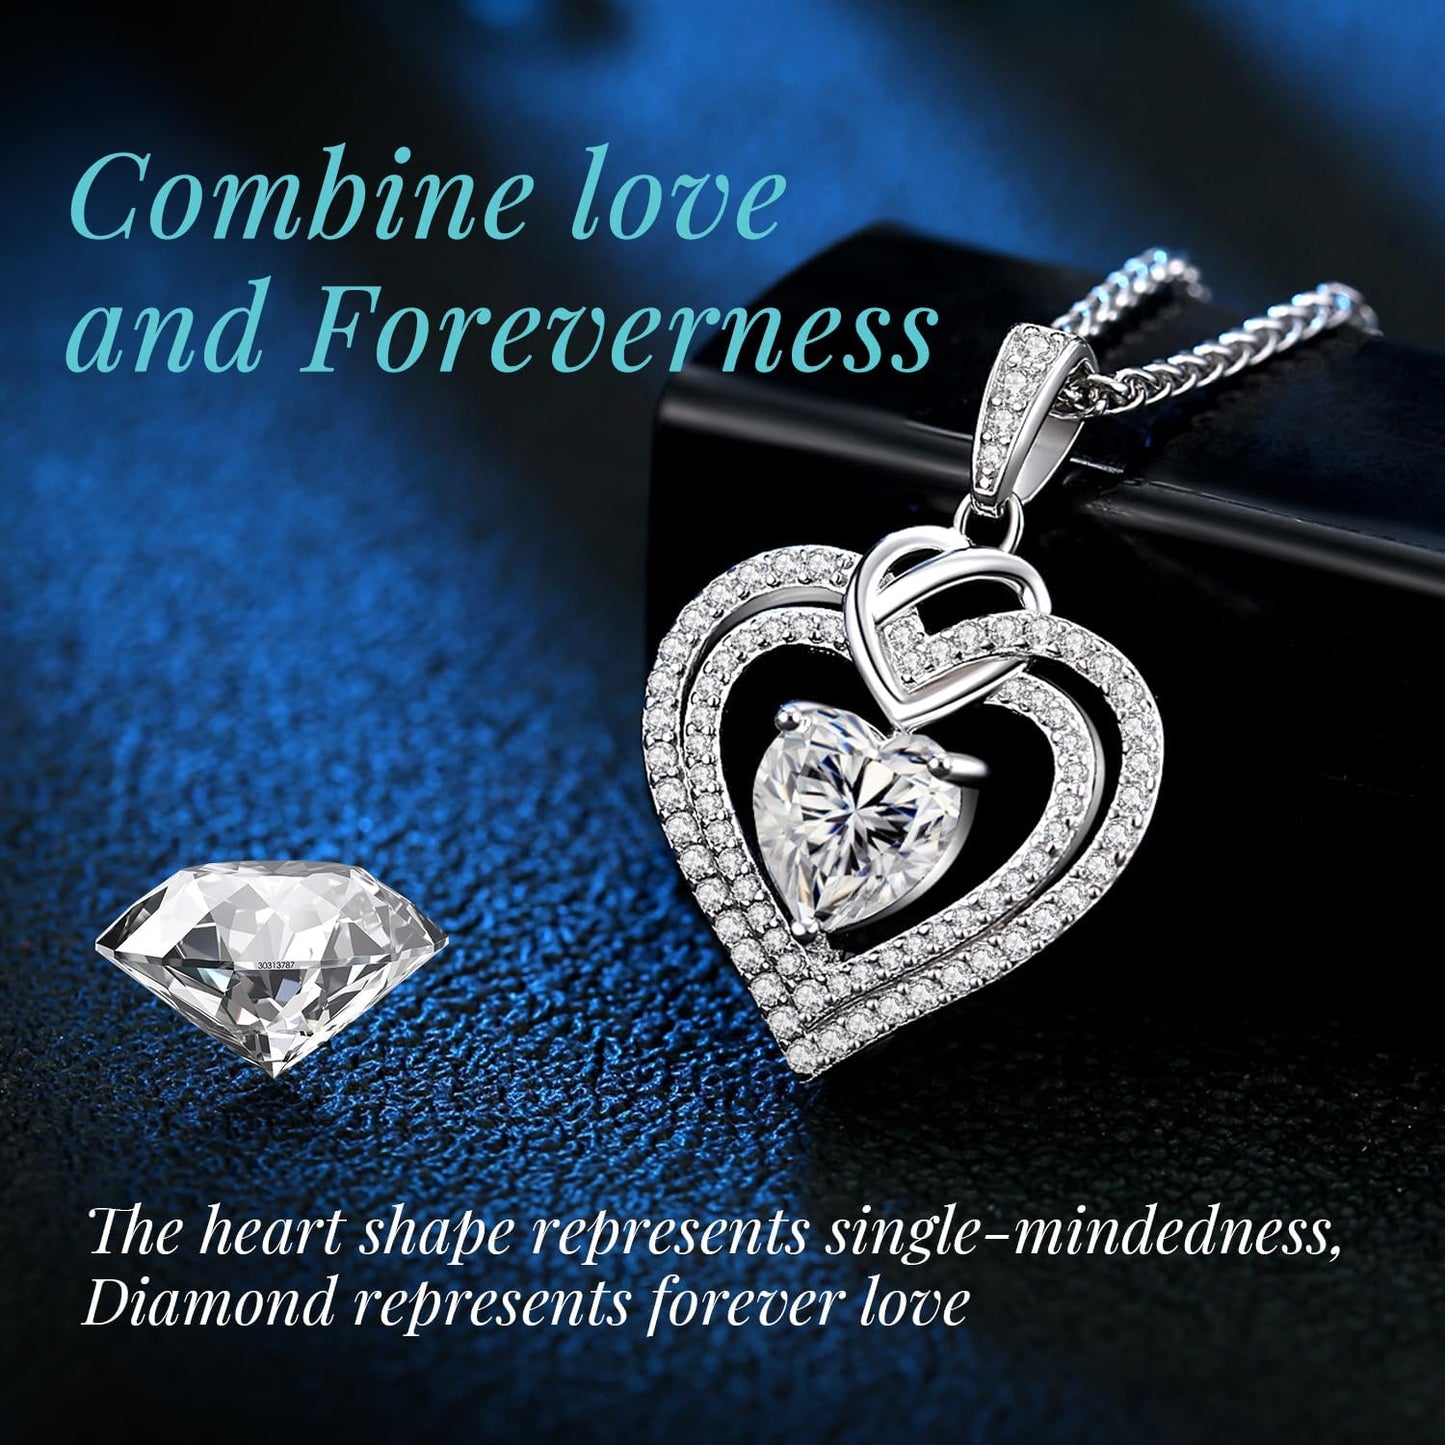 OOBEE Moissanite Diamond Necklace Valentine's Gifts for Women, 925 Sterling Silver Fine Jewelry, Heart Pendant Necklace Birthday Anniversary Christmas Gift for Women Wife Mom Girlfriend Lady (2.0 Carats Heart Moissanite Diamond)